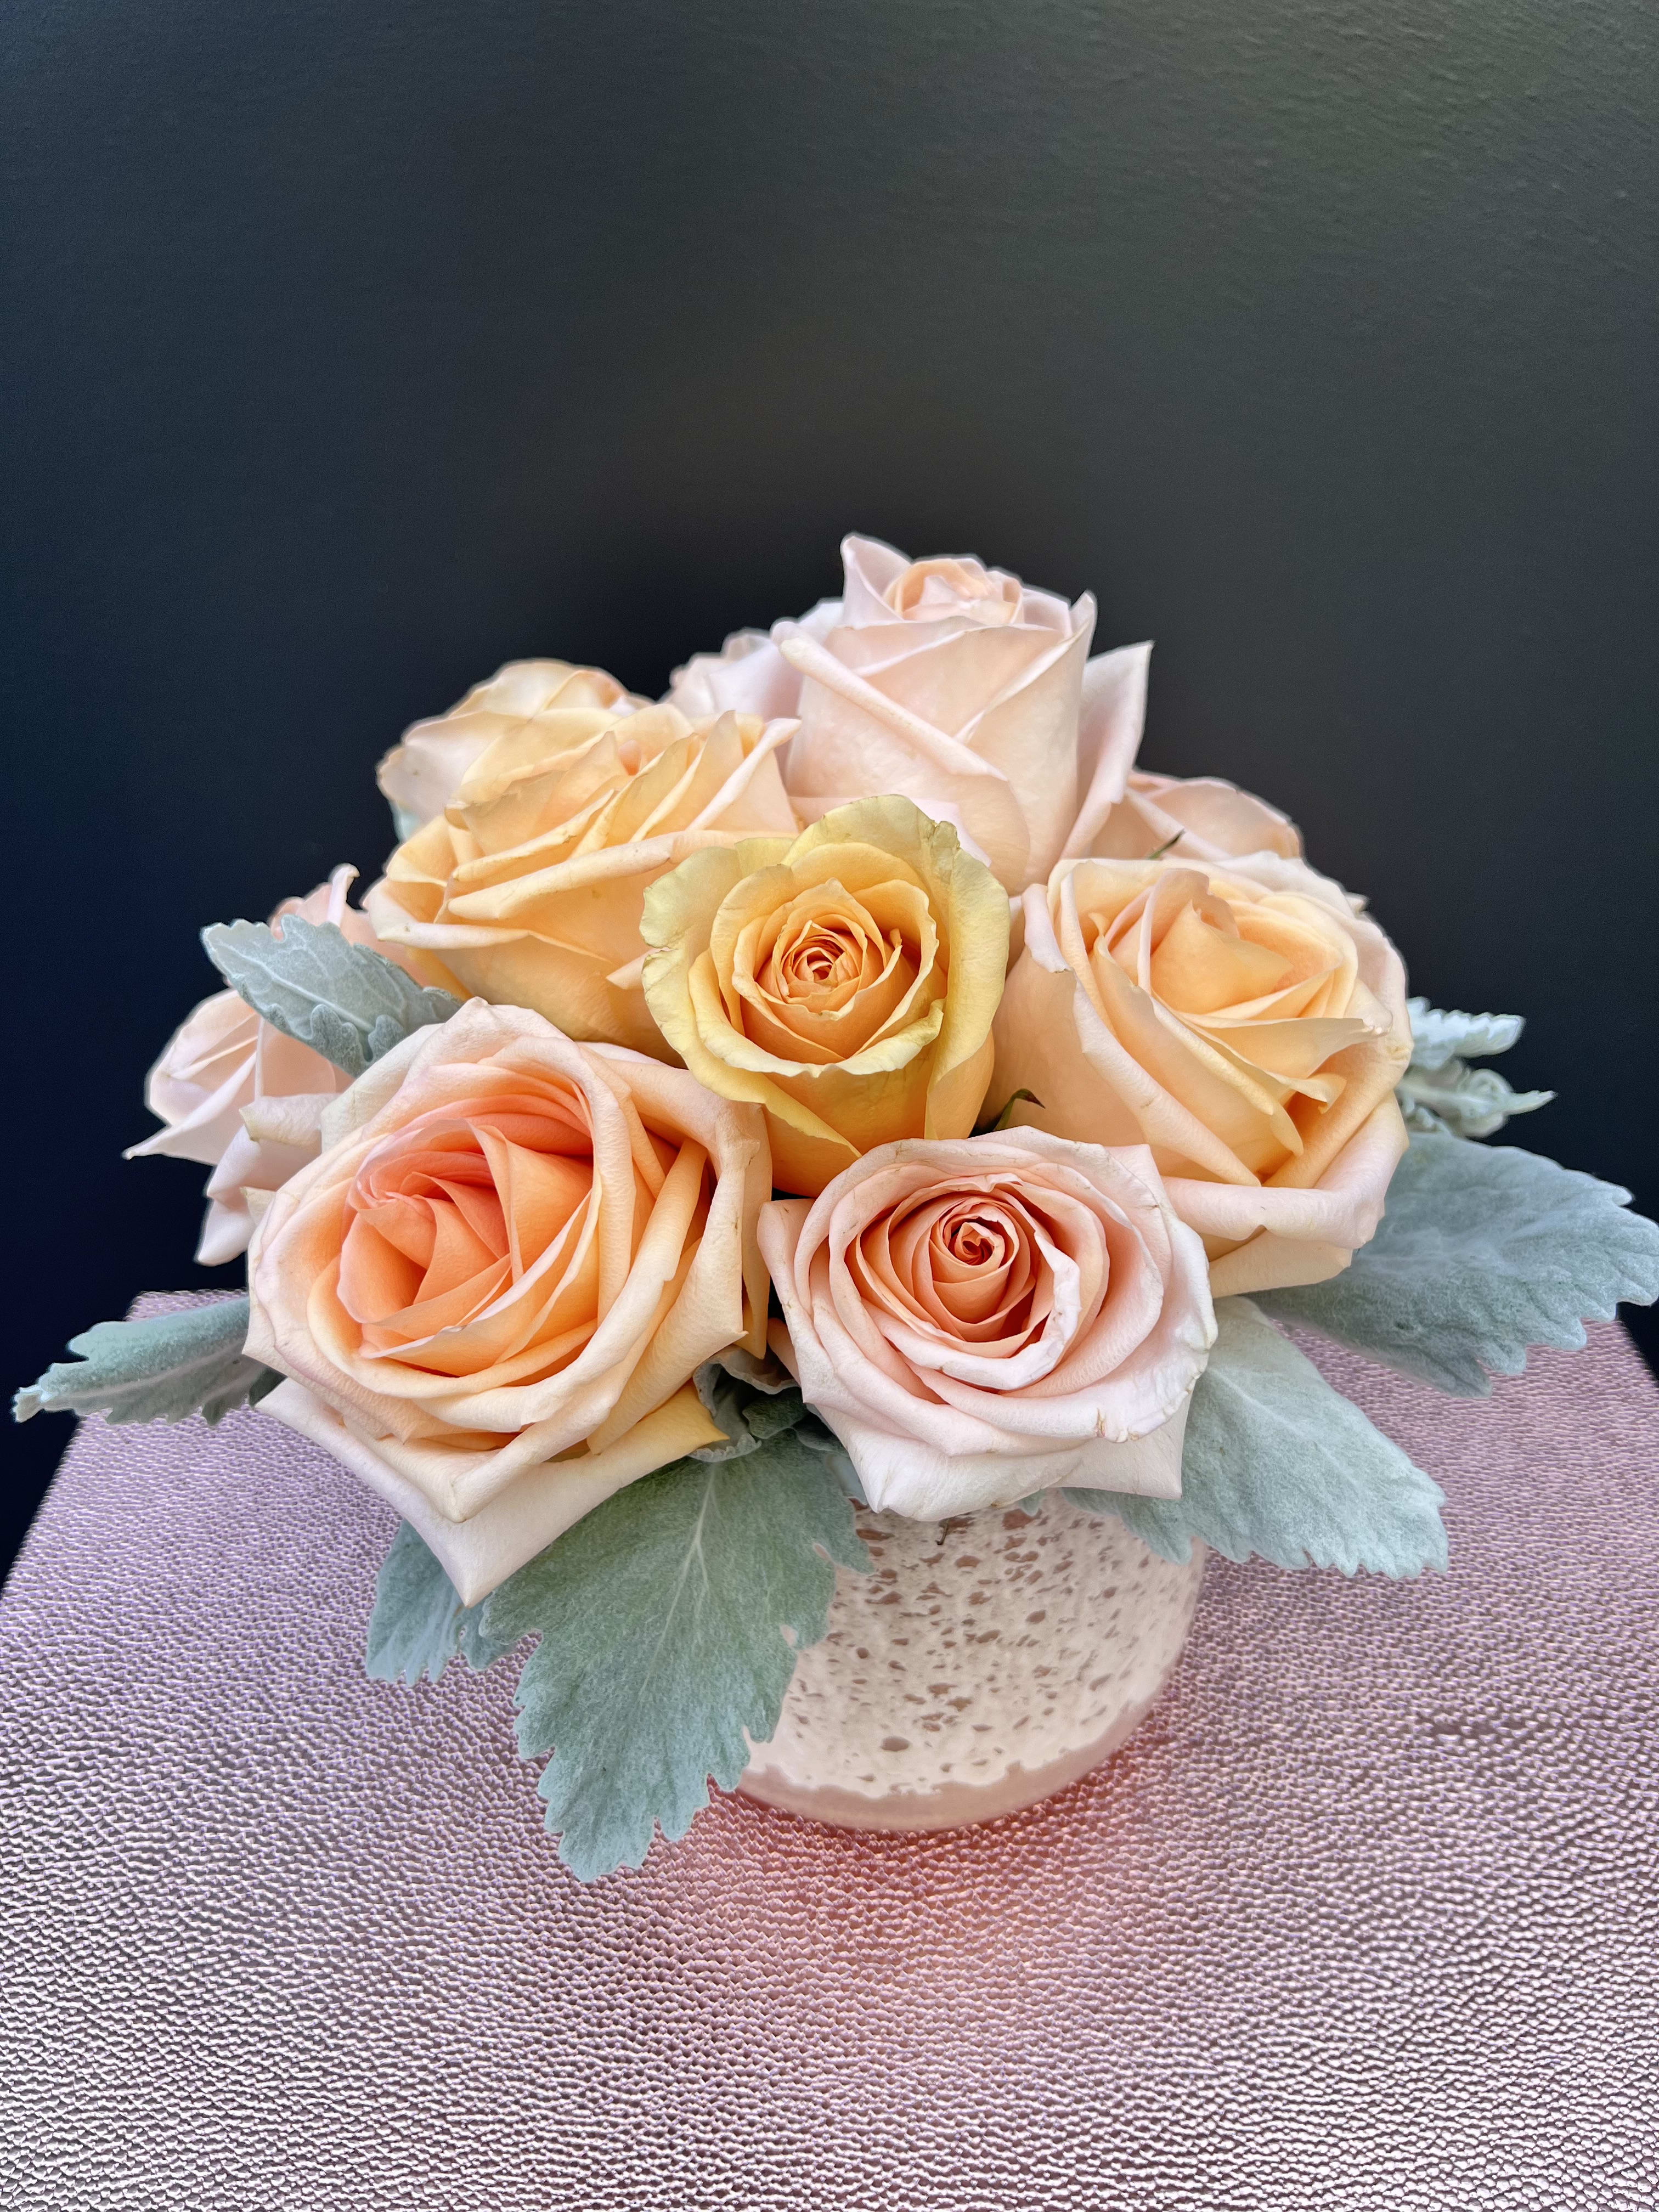 Euphoria  - Peach roses are delicate yet charming, making this arrangement elegant and breathe-taking.  